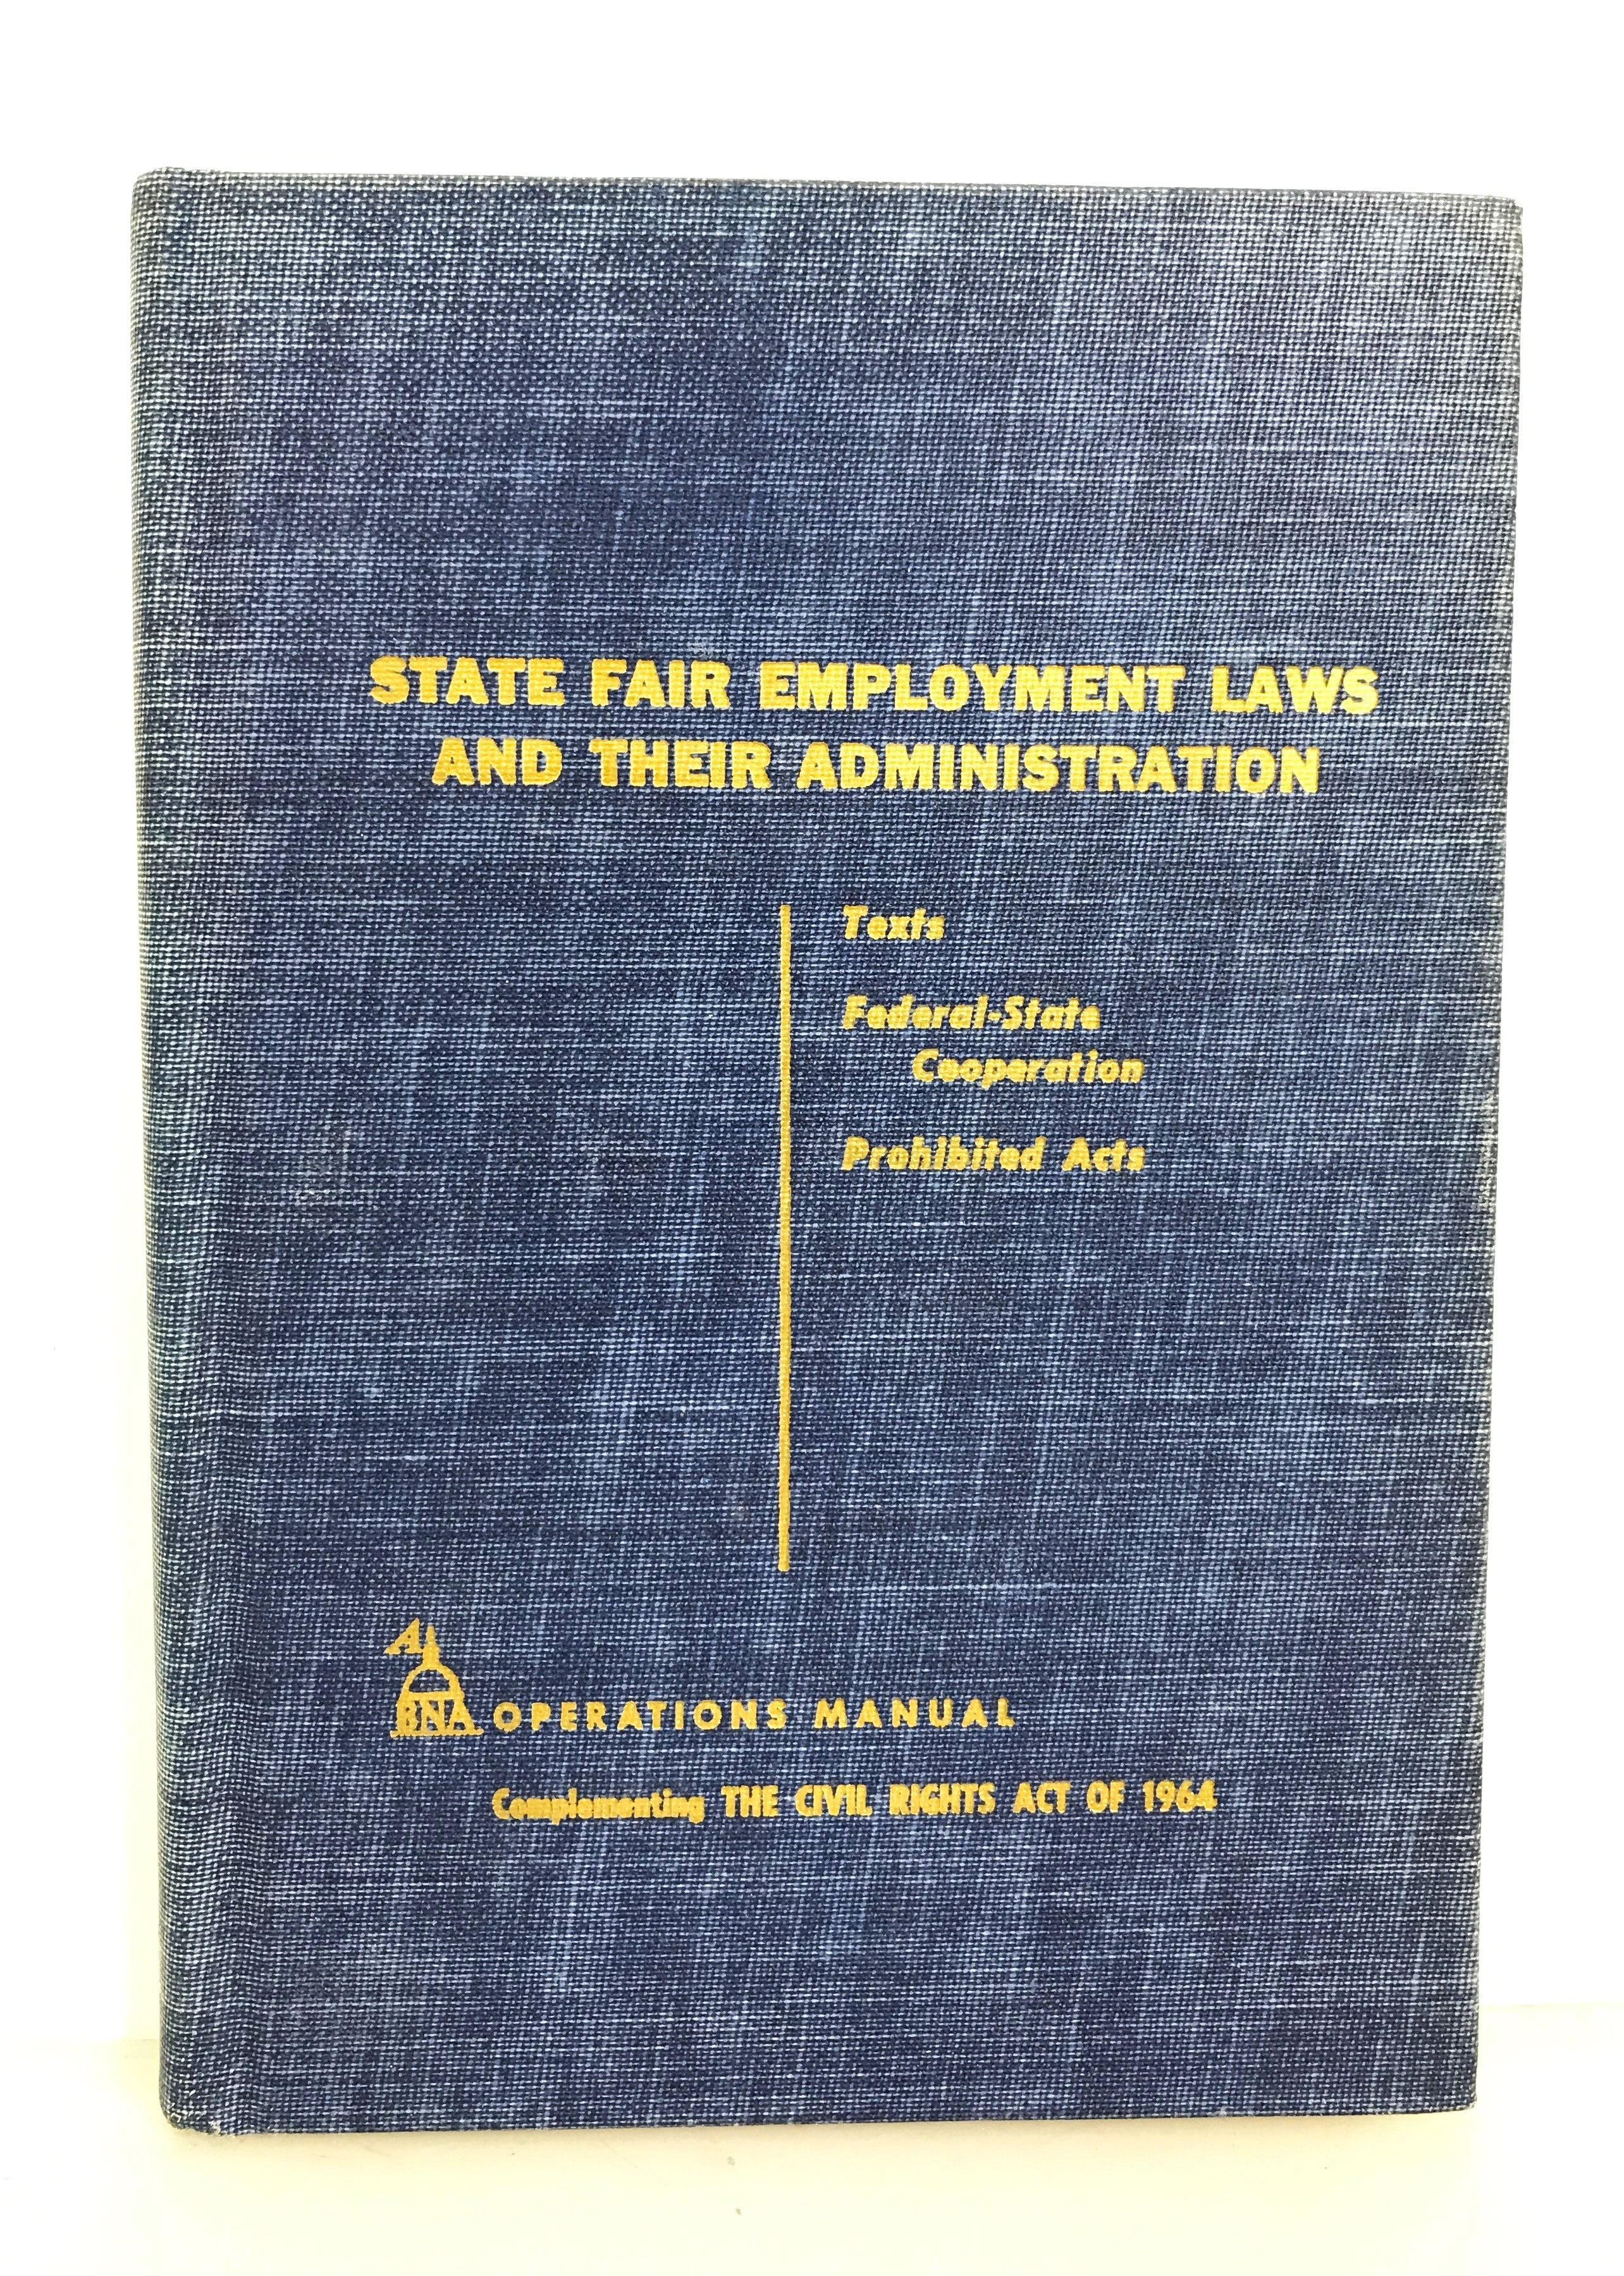 State Fair Employment Laws and their Administration Complementing the Civil Rights Act of 1964 HC